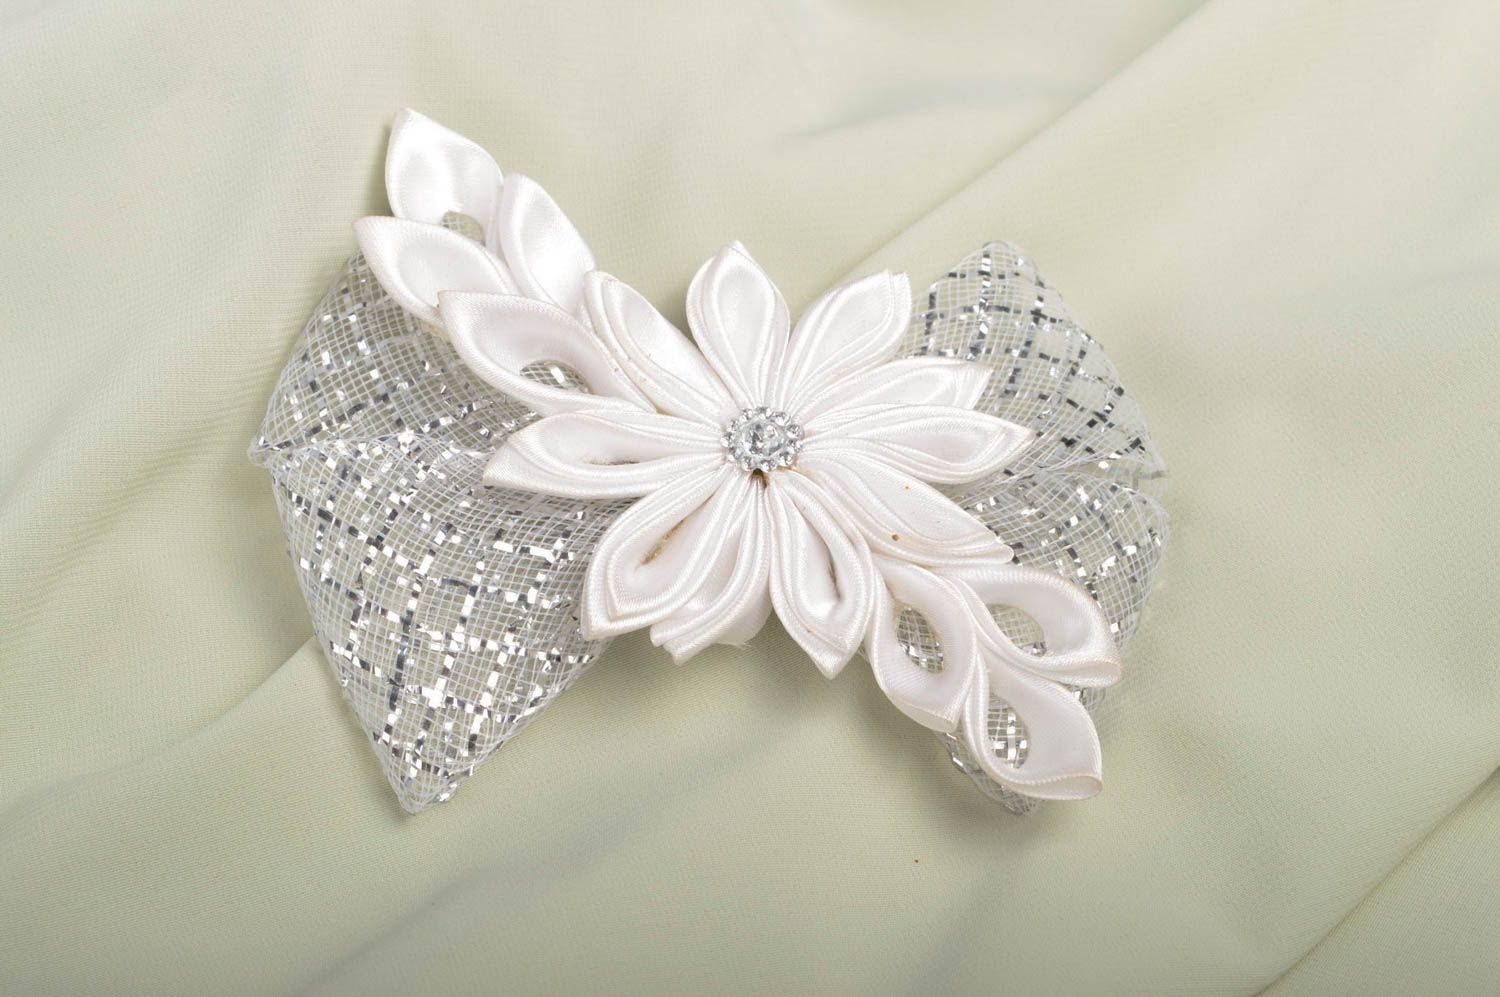 Handmade hair clip flower hair accessories flowers for hair gifts for kids photo 1